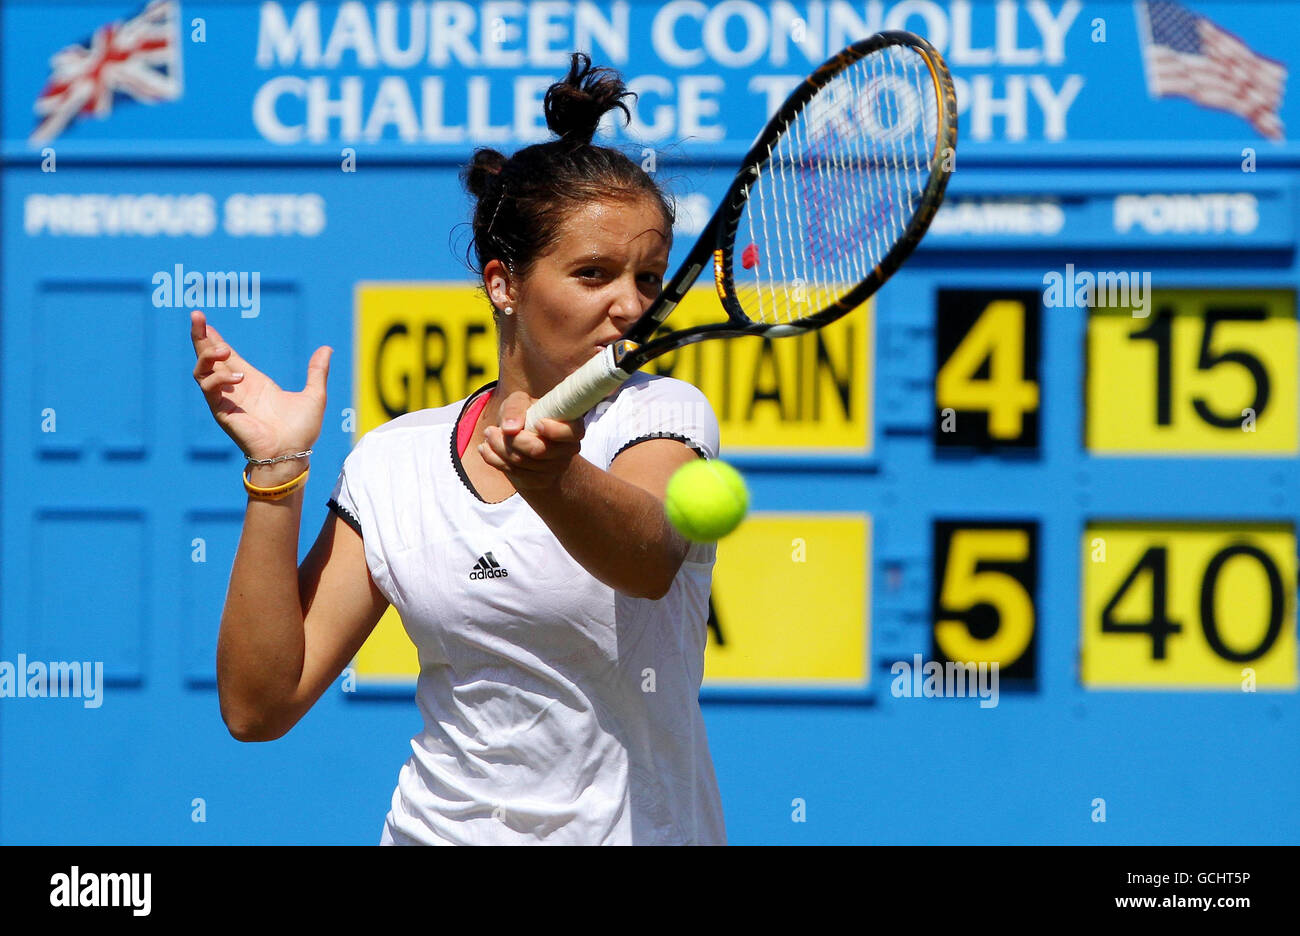 Great Britain's Laura Robson in action during her Maureen Connolly Challenge Trophy match against the USA during the AEGON International at Devonshire Park, Eastbourne. Stock Photo